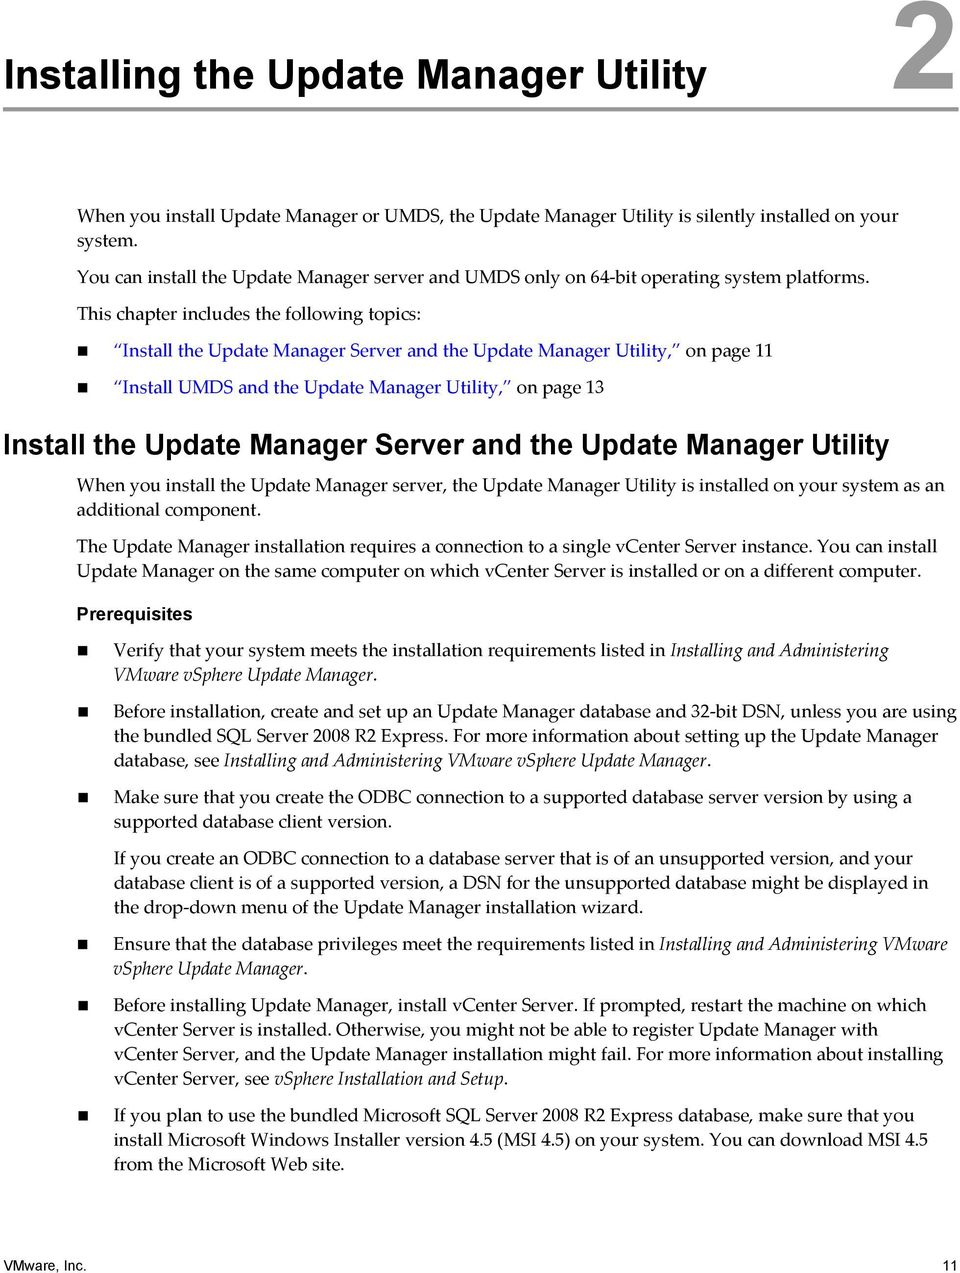 This chapter includes the following topics: Install the Update Manager Server and the Update Manager Utility, on page 11 Install UMDS and the Update Manager Utility, on page 13 Install the Update